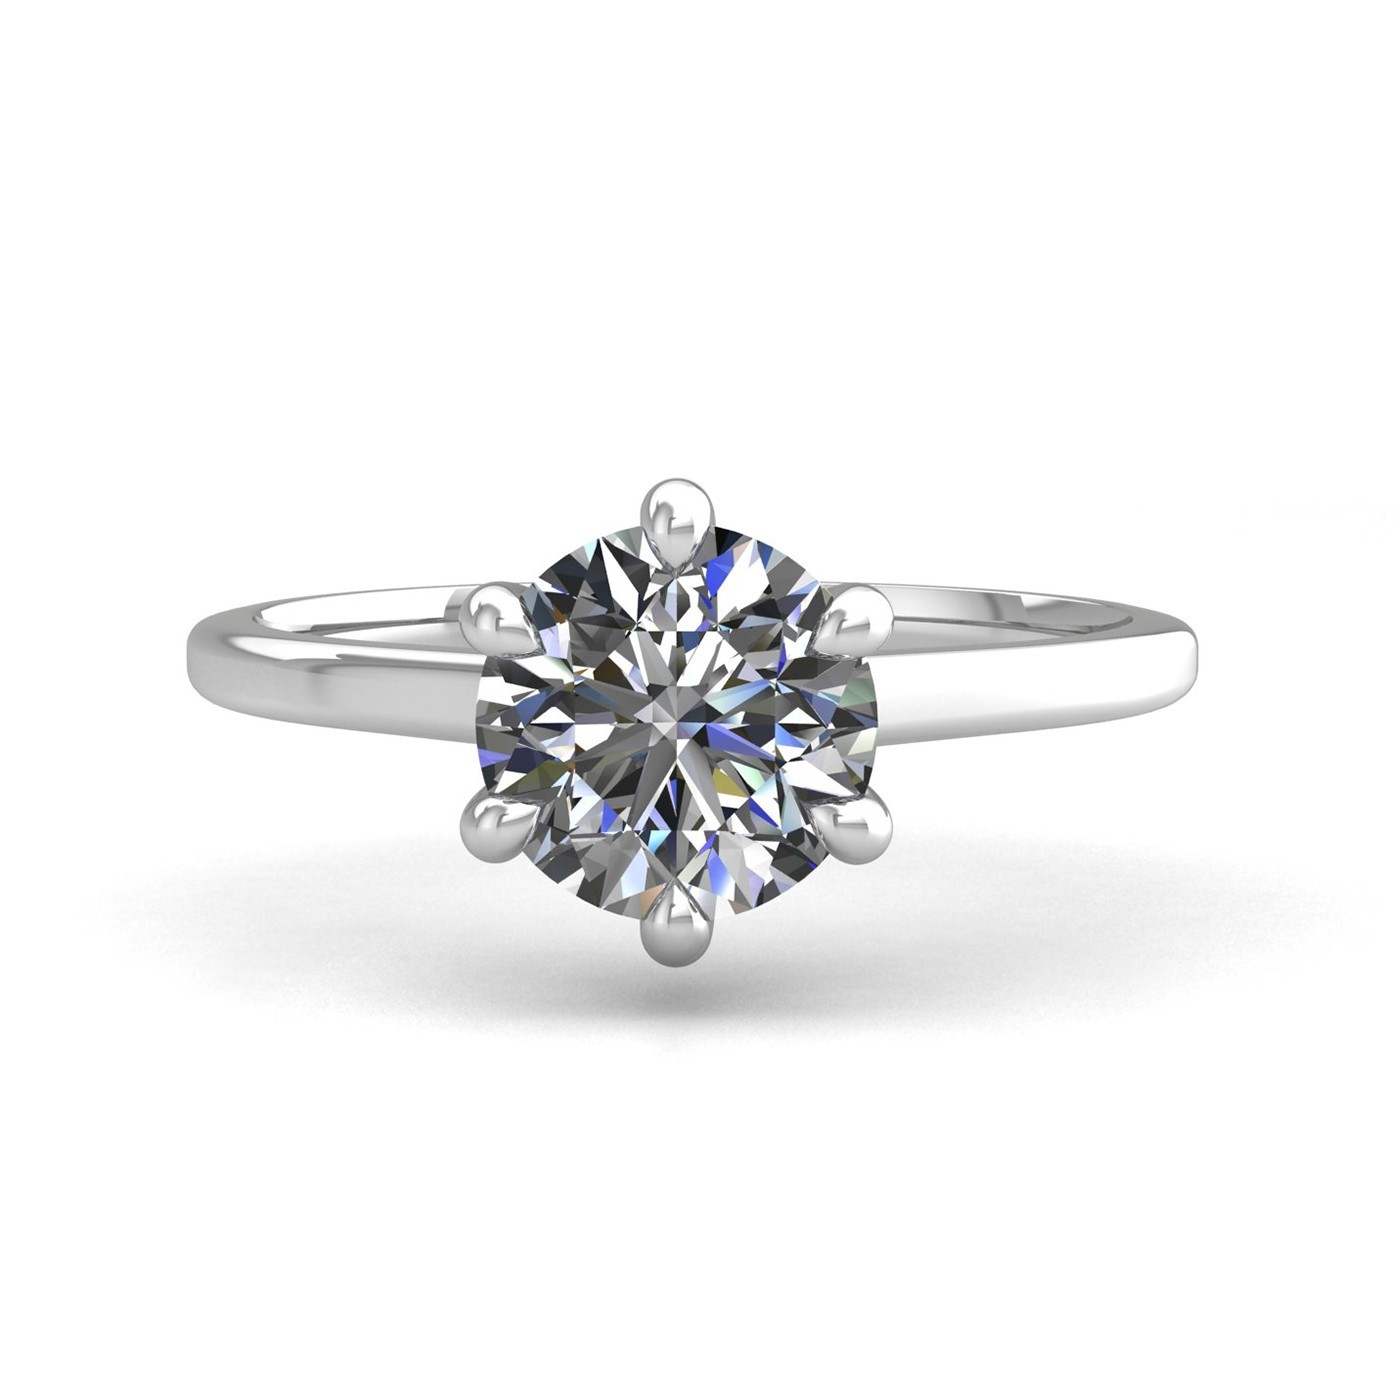 18k white gold 1,50 ct 6 prongs solitaire round cut diamond engagement ring with whisper thin band Photos & images